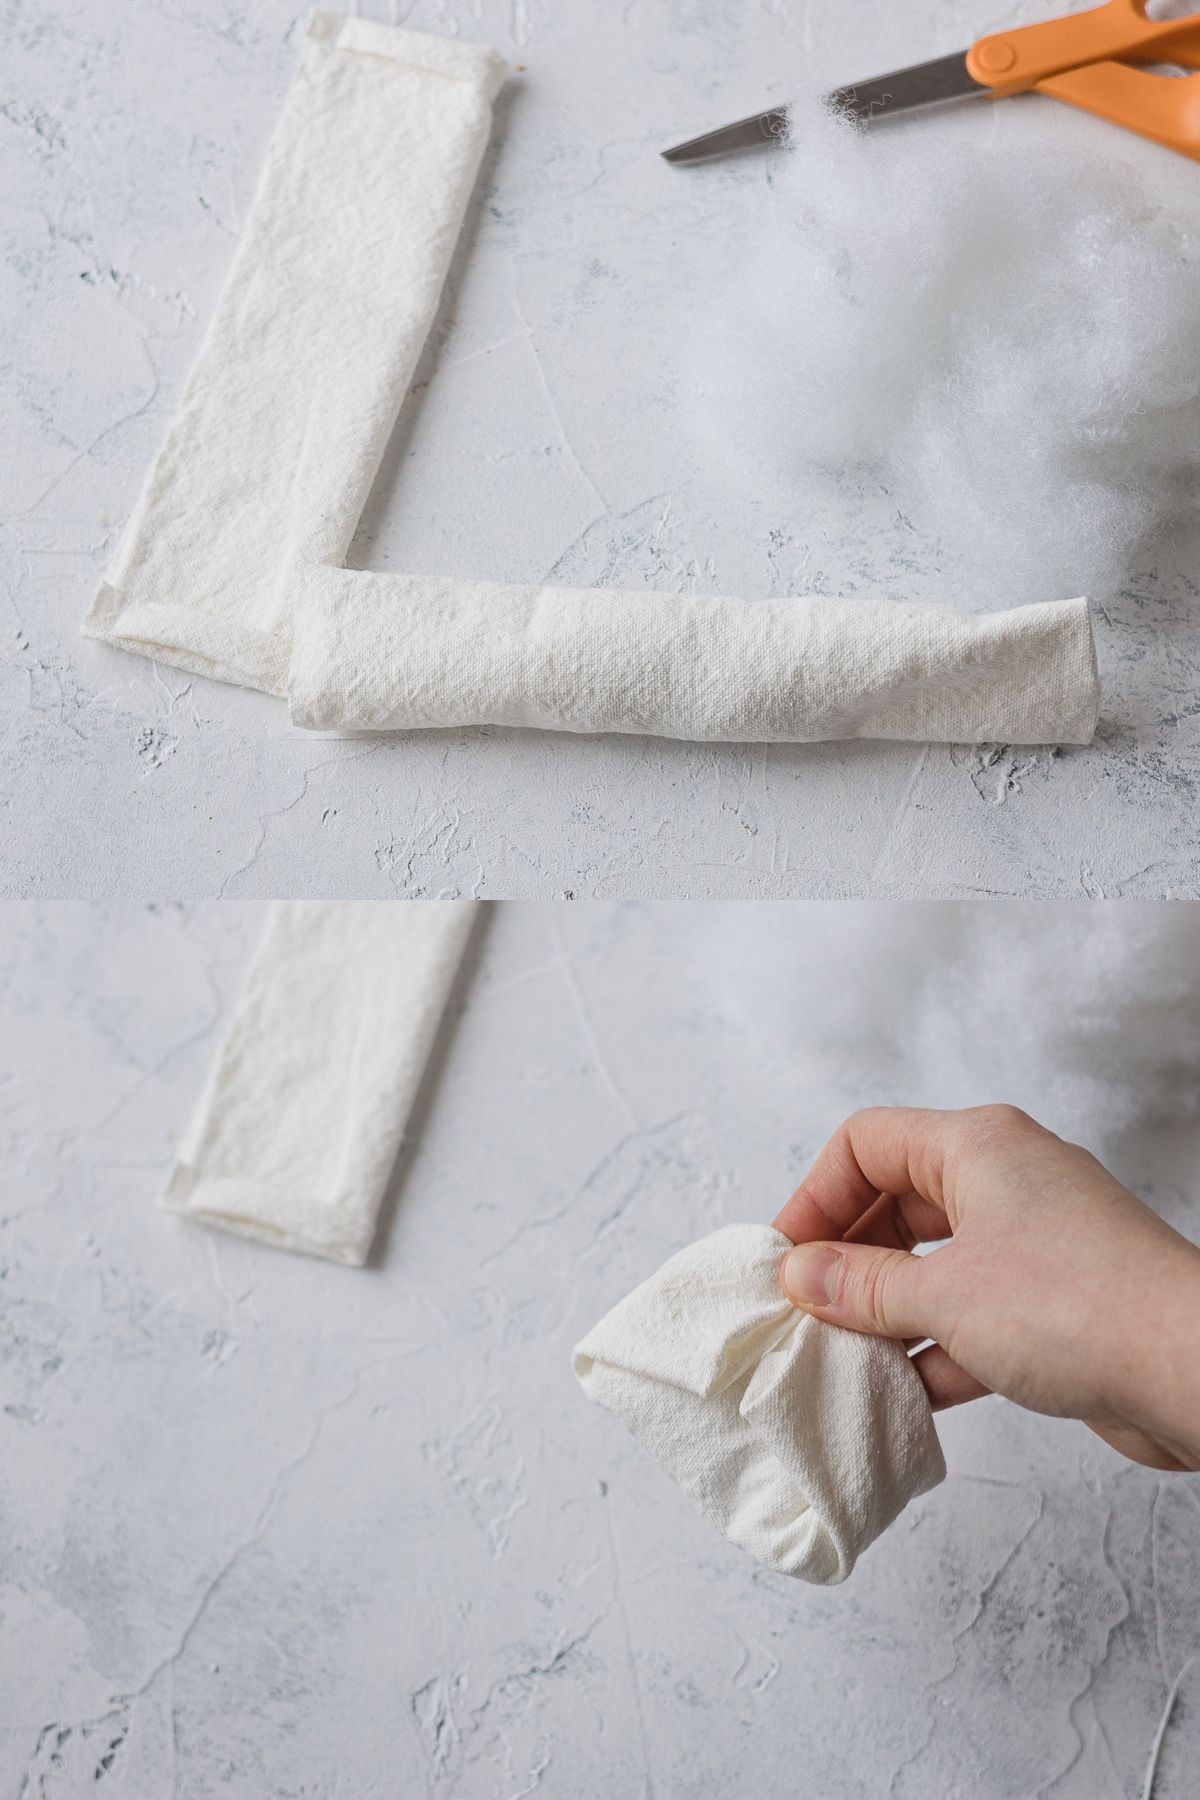 Stuffing a fabric tube with poly fill and using it to create a doughnut shape.